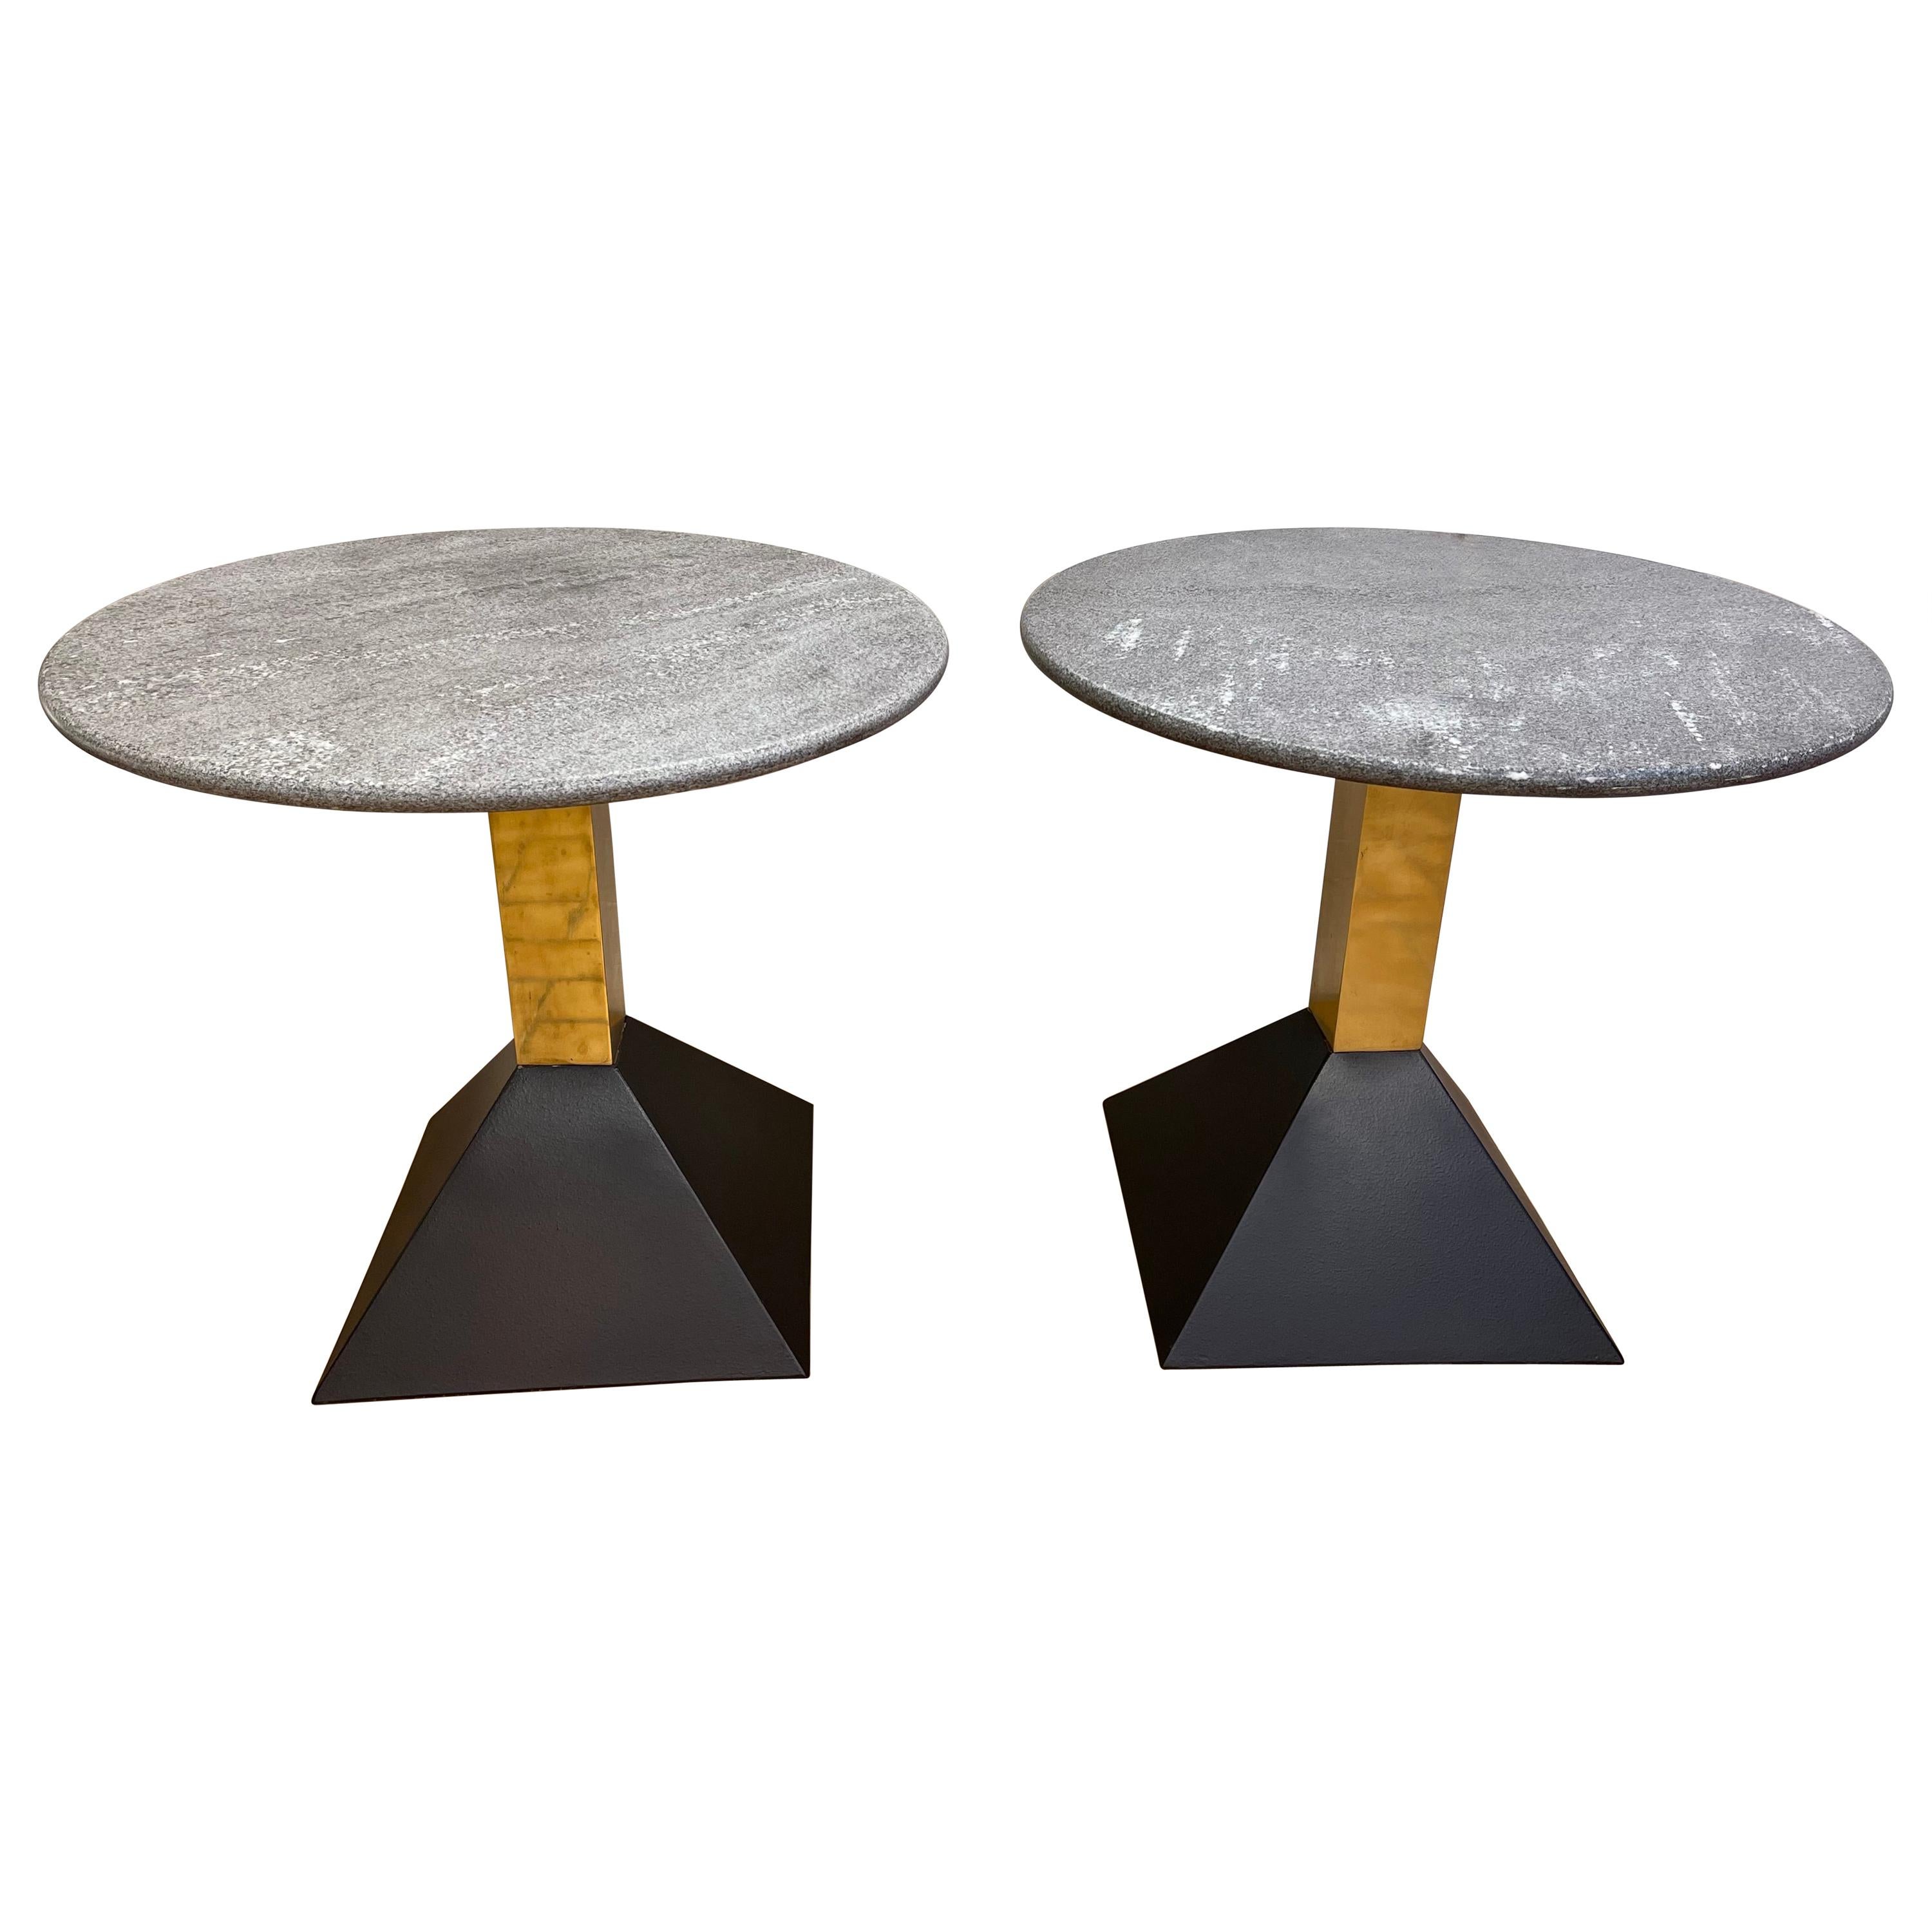 Pair of Gray Granite and Brass Side Tables, Italy, 1980s For Sale